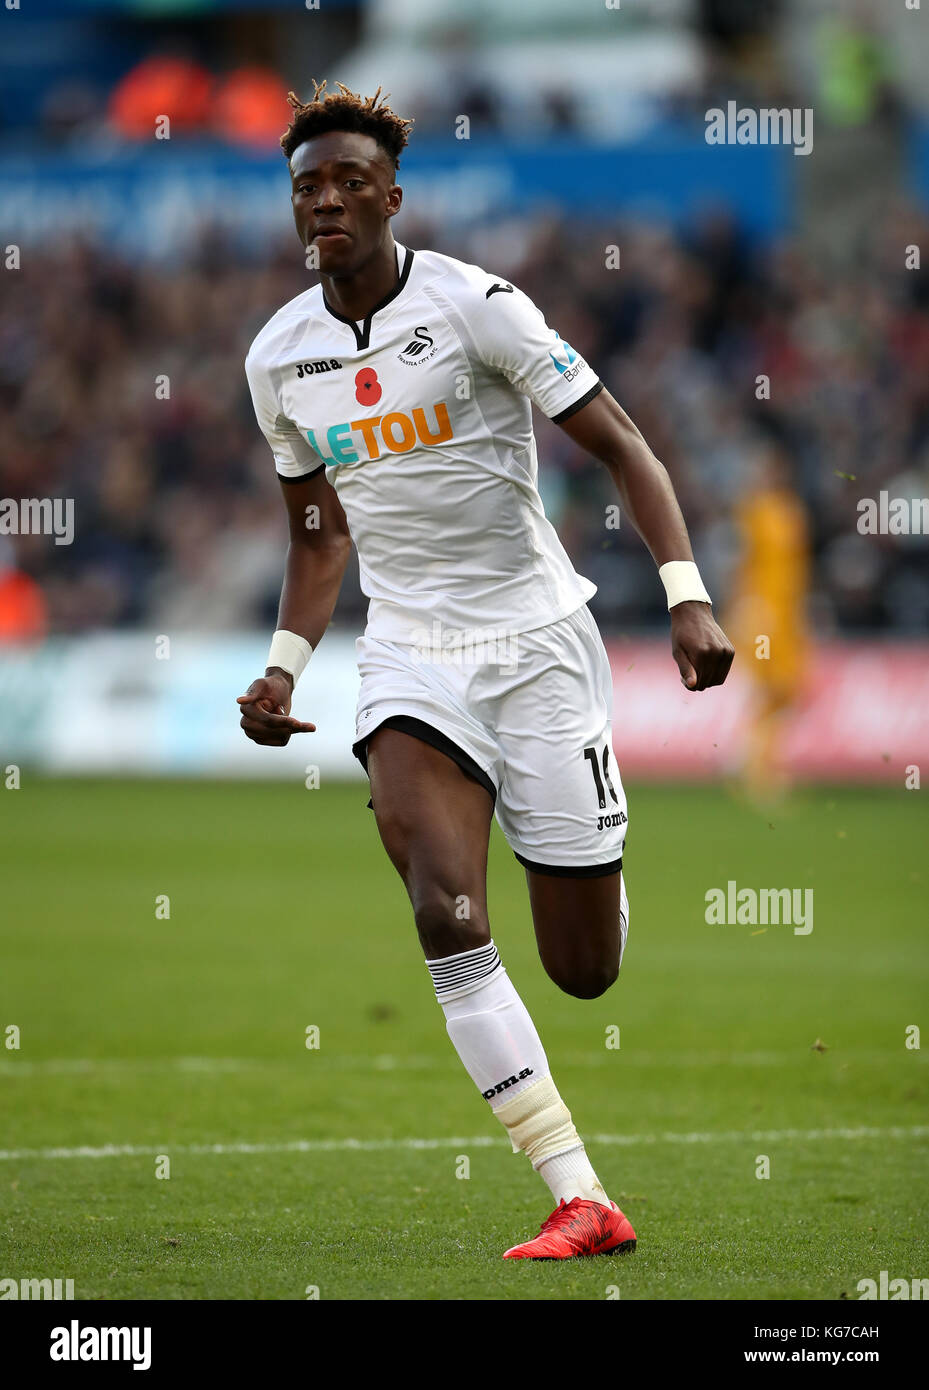 Swansea City's Tammy Abraham during the Premier League match at the Liberty Stadium, Swansea. PRESS ASSOCIATION Photo. Picture date: Saturday November 4, 2017. See PA story SOCCER Swansea. Photo credit should read: Nick Potts/PA Wire. RESTRICTIONS: No use with unauthorised audio, video, data, fixture lists, club/league logos or 'live' services. Online in-match use limited to 75 images, no video emulation. No use in betting, games or single club/league/player publications Stock Photo